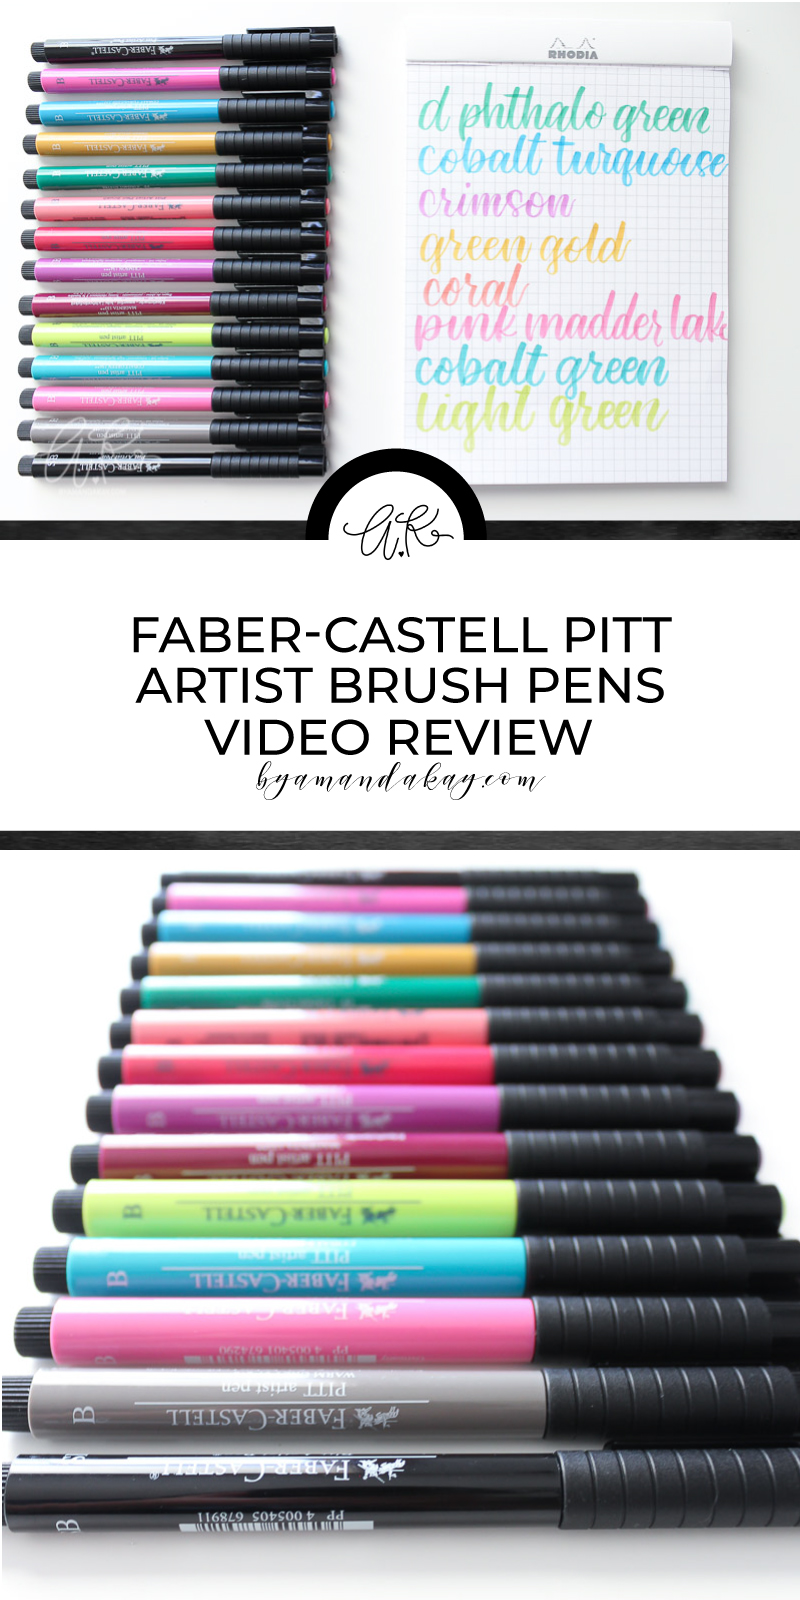 Pin image for faber-castell review